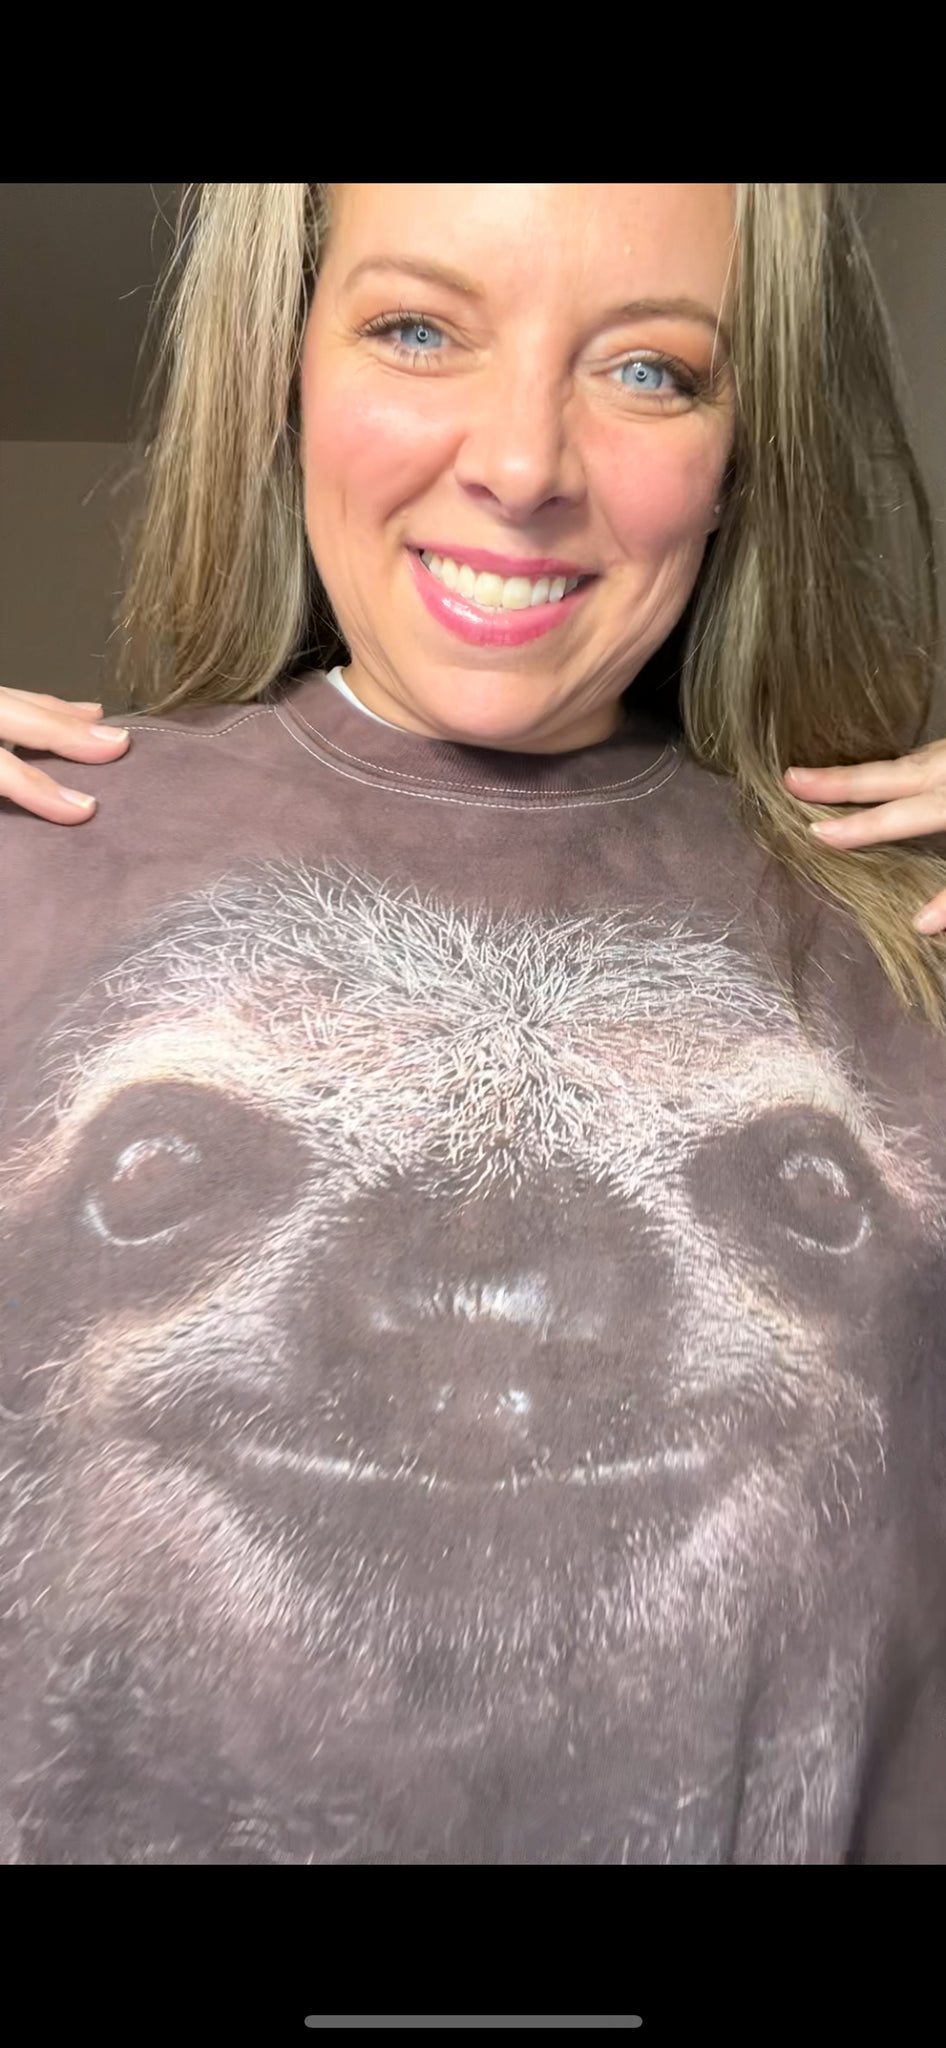 Sloth - woman’s large